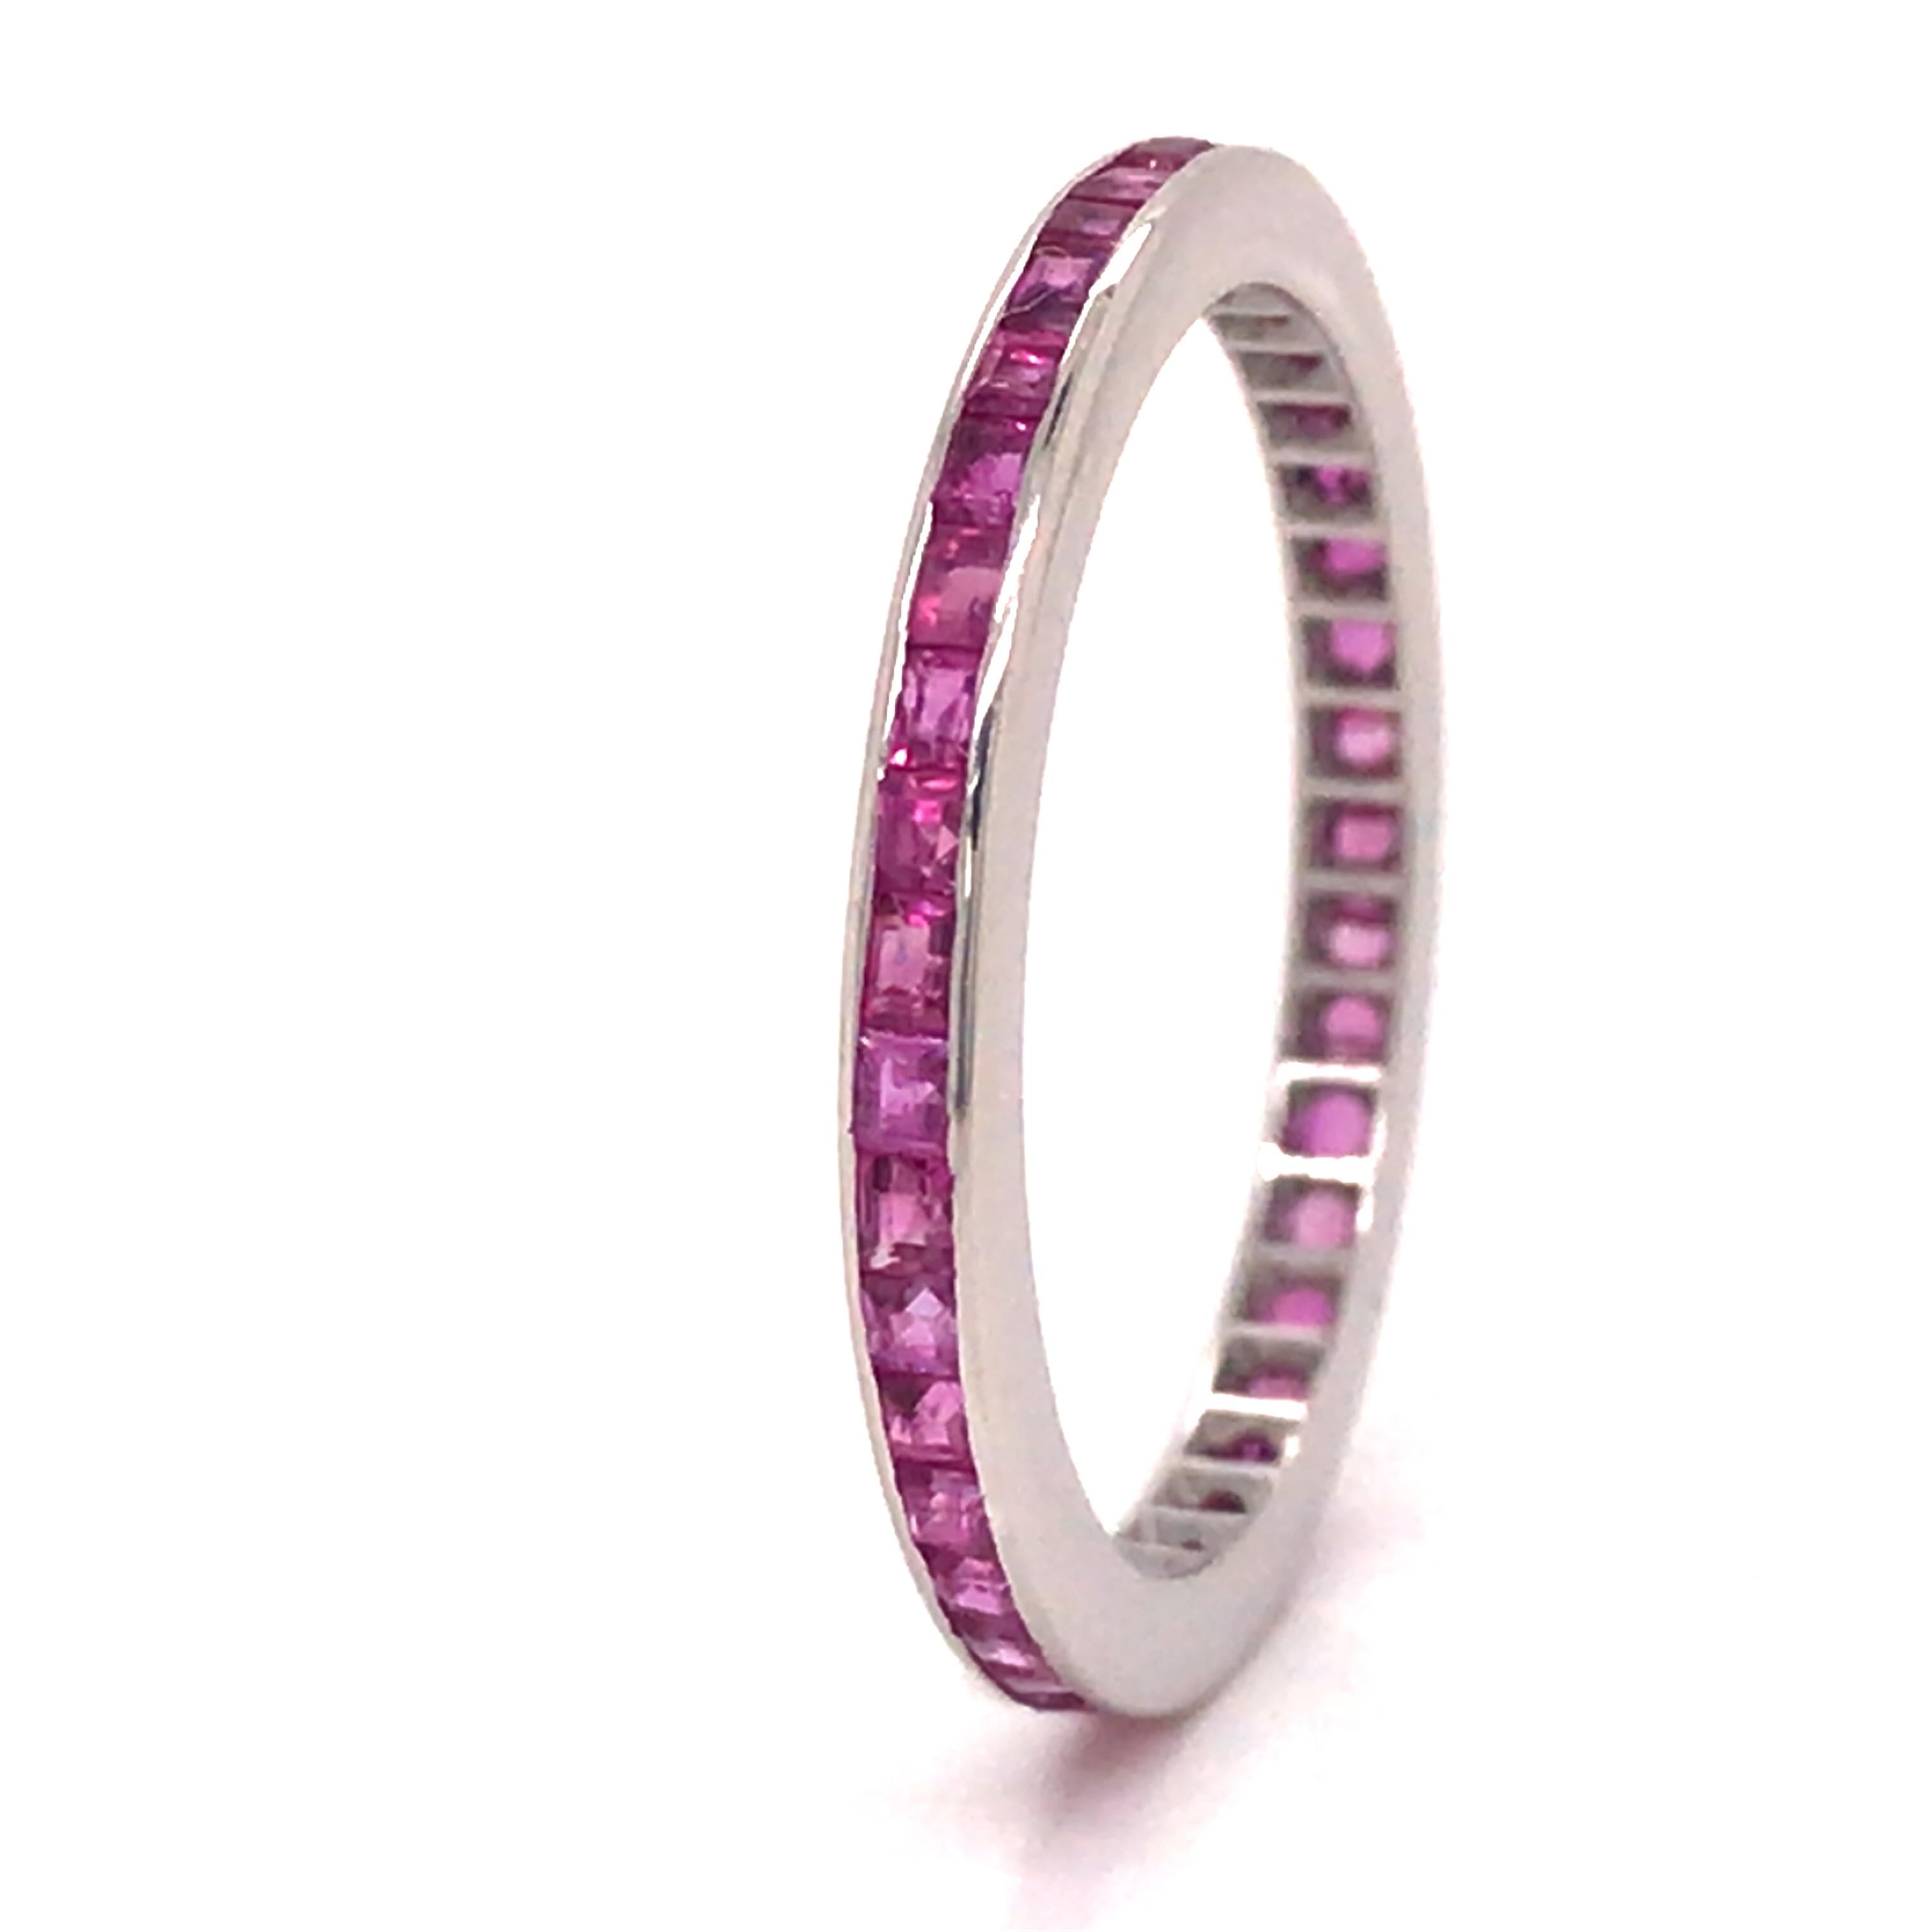 Ruby Channel Set Thin Eternity Band in 14K White Gold.  (80) Ruby Gemstones weighing 1.0 carat total weight are expertly channel set.  The Ring measures 1/16 inch in width.  Ring size 6 3/4. 1.39 grams.